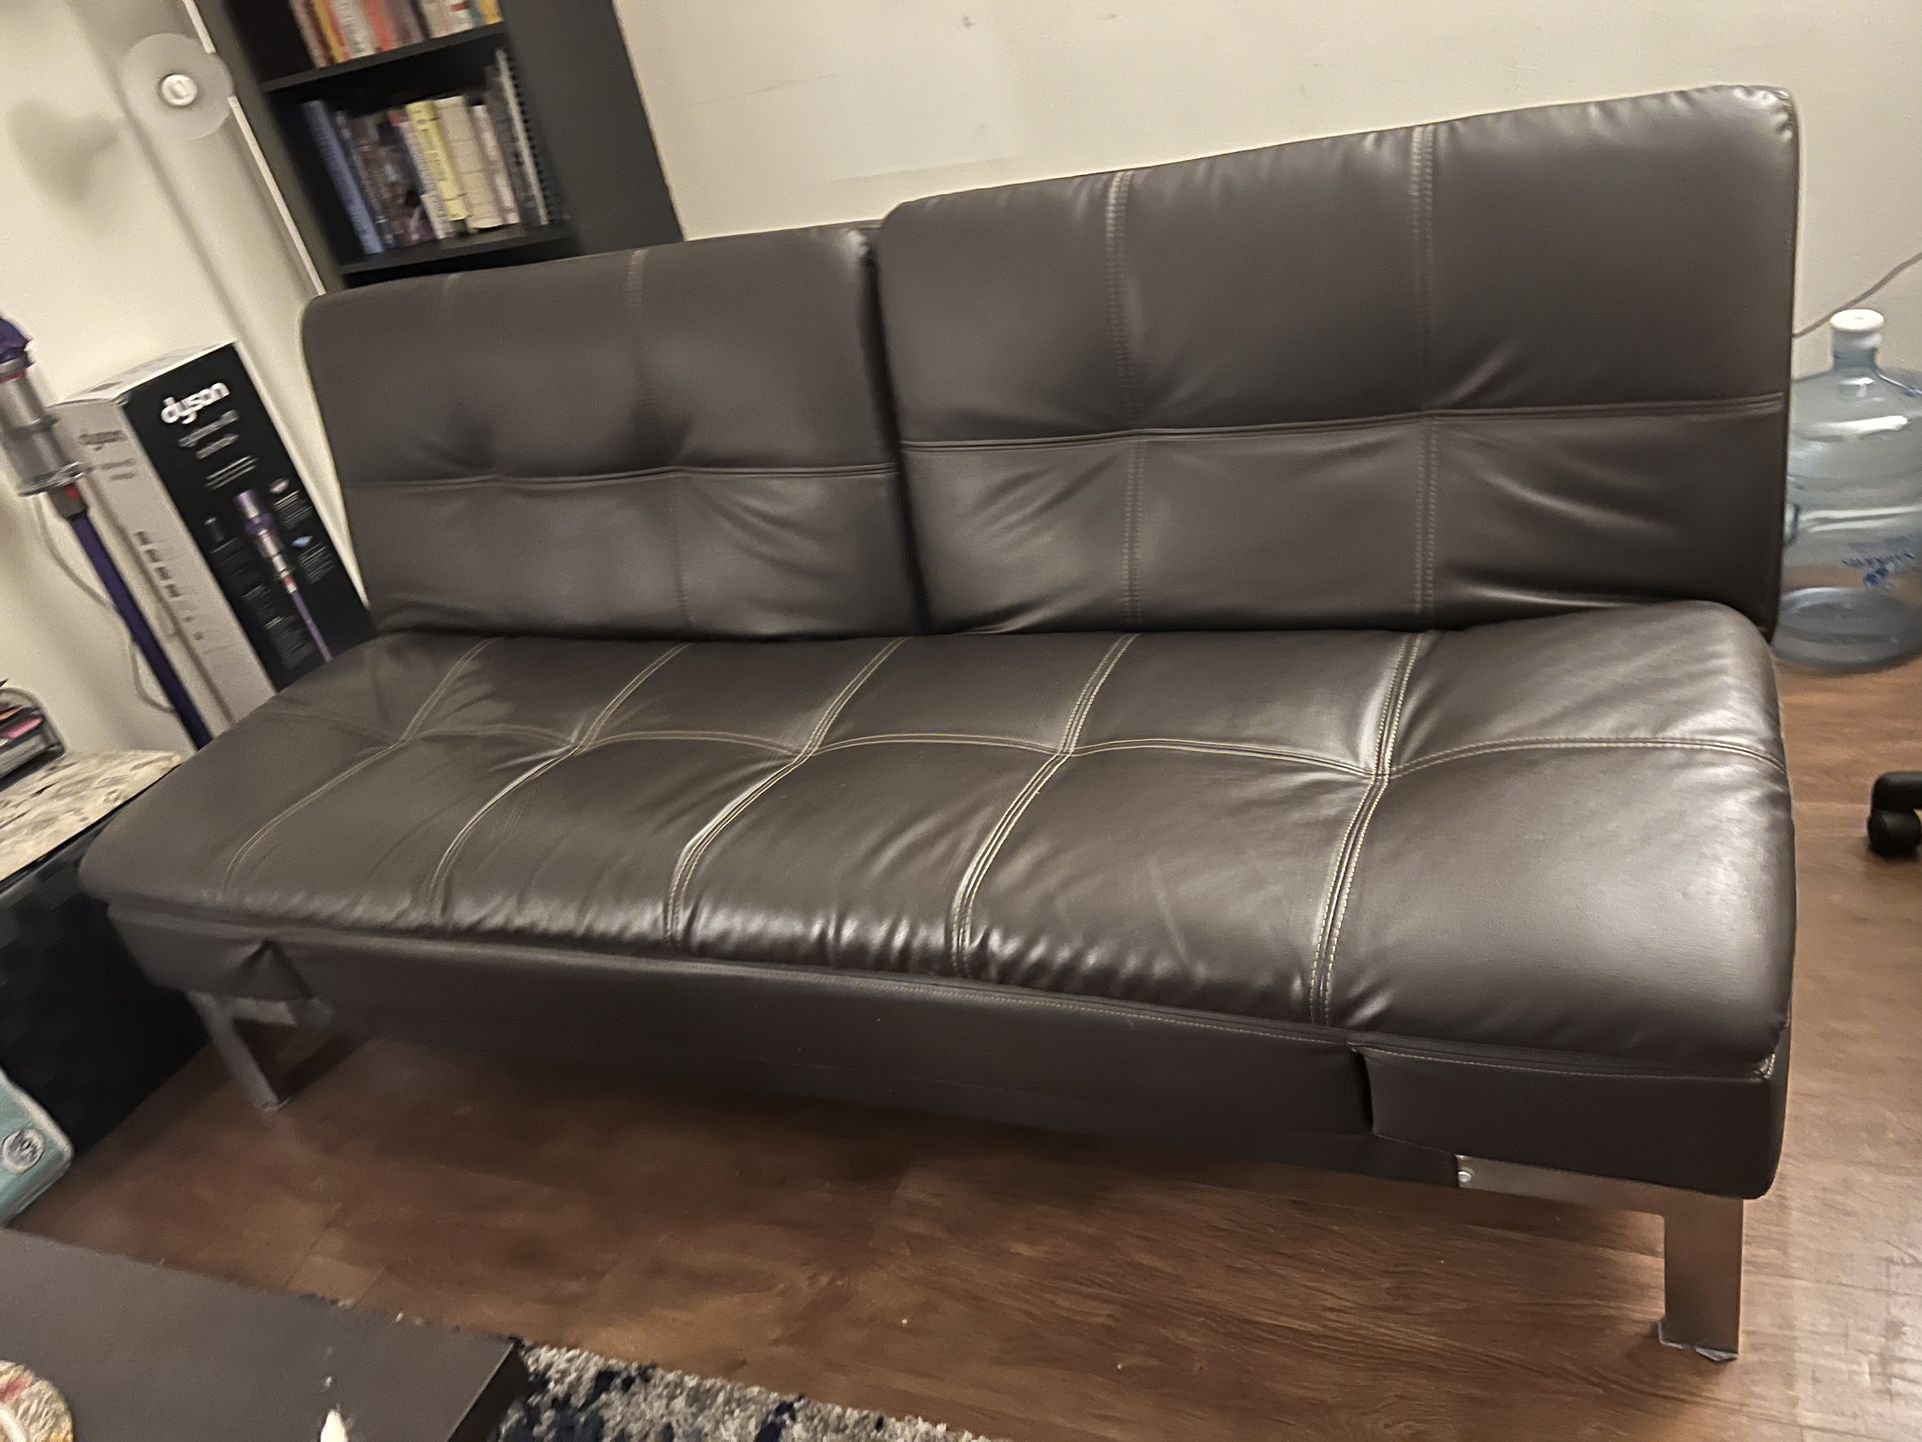 Convertible Leather Coddle Couch